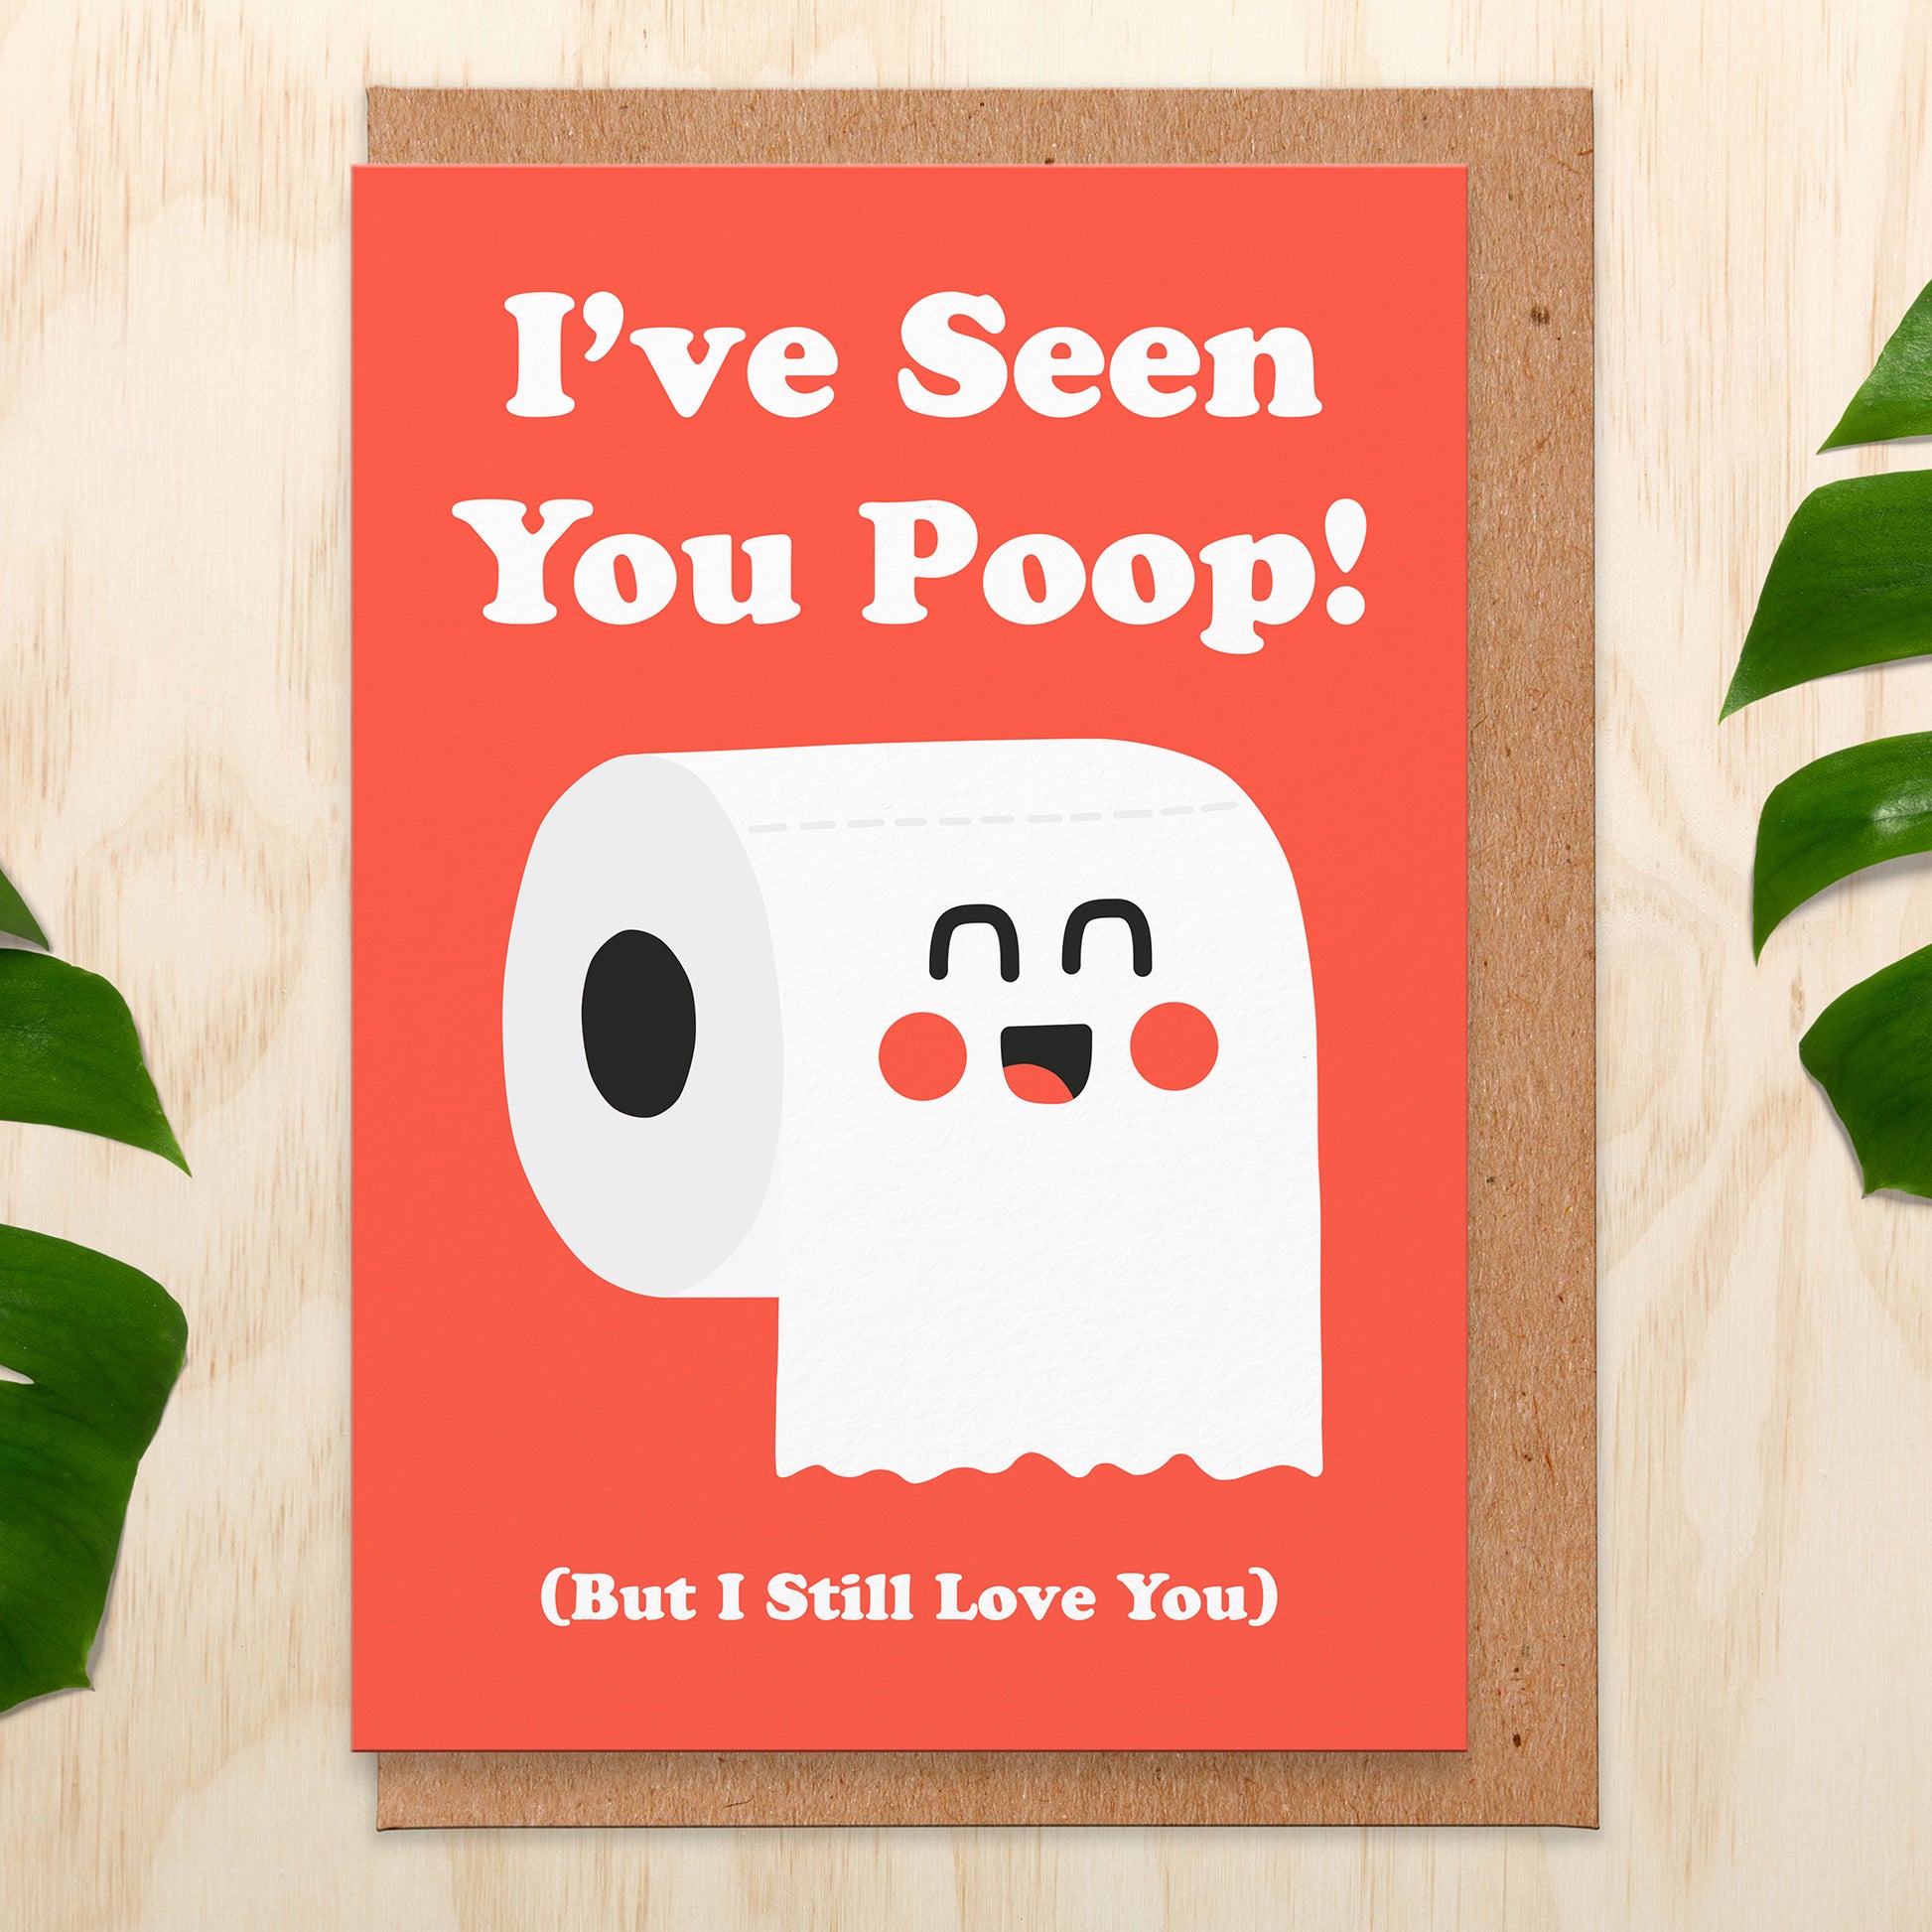 Love card with and illustration of a laughing toilet roll on a red background and the words read I've seen you poop! (but I still love you).